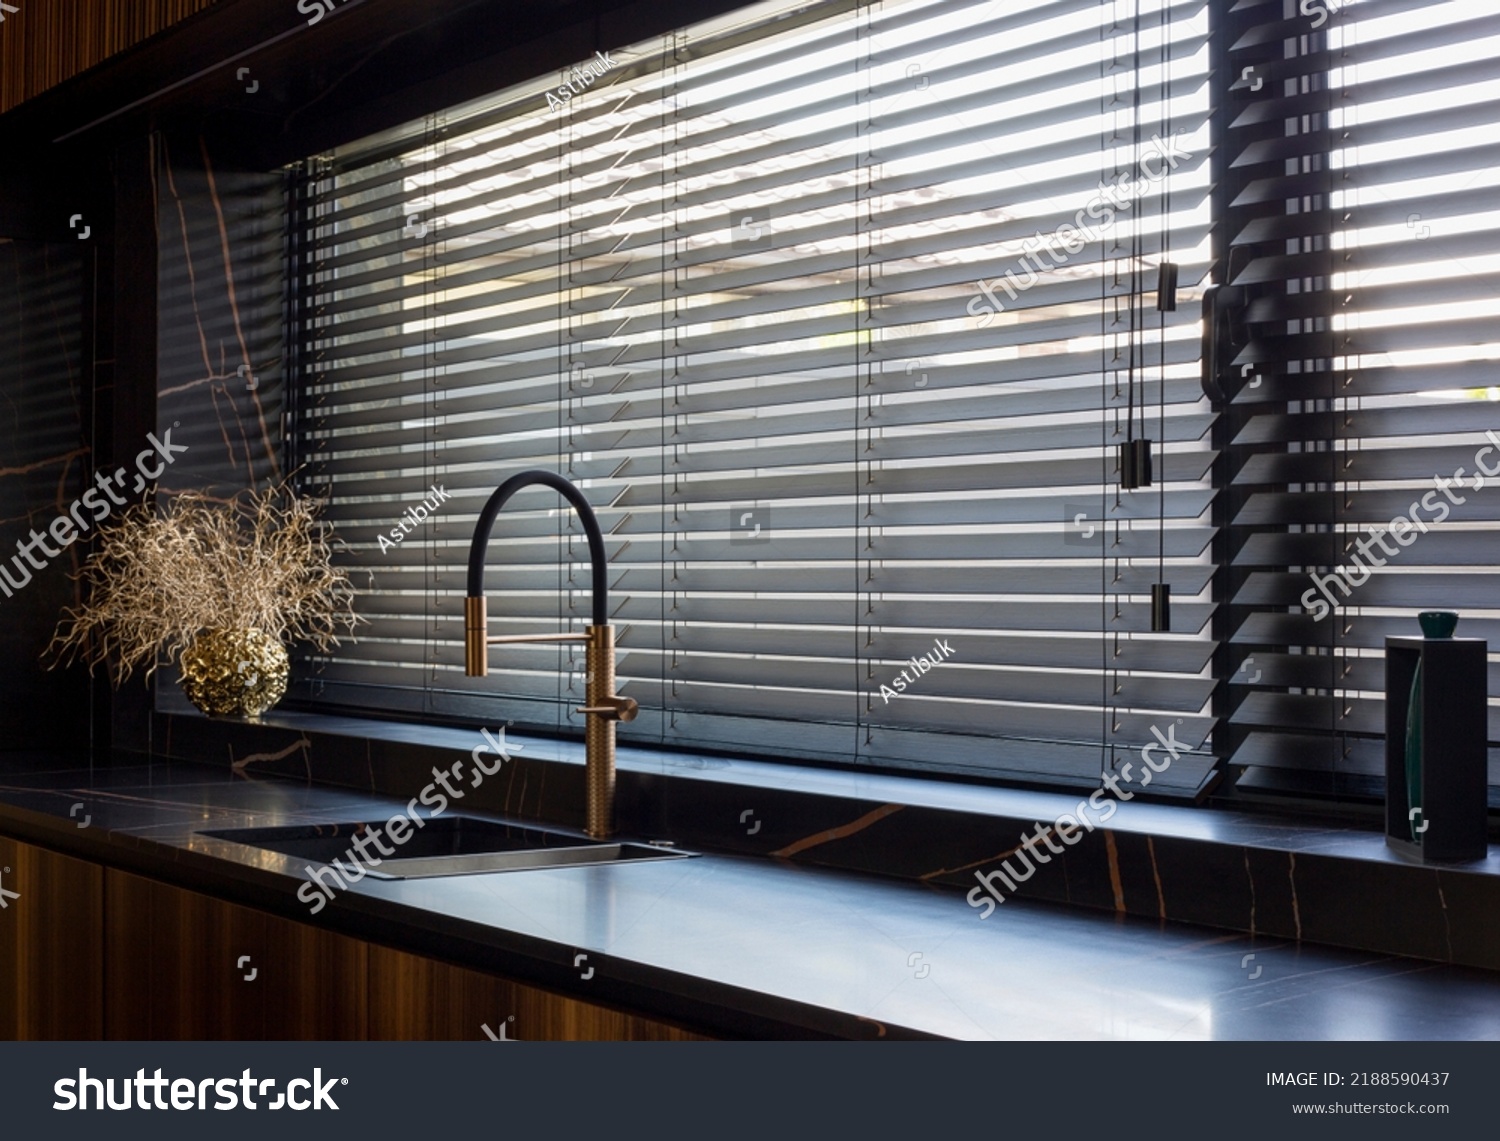 Wooden blinds black color closeup on the window. Bamboo slats 50mm wide. Venetian wood blinds in the kitchen. Black tapes. Sink with copper faucet near the window. Round vase is on the windowsill. #2188590437